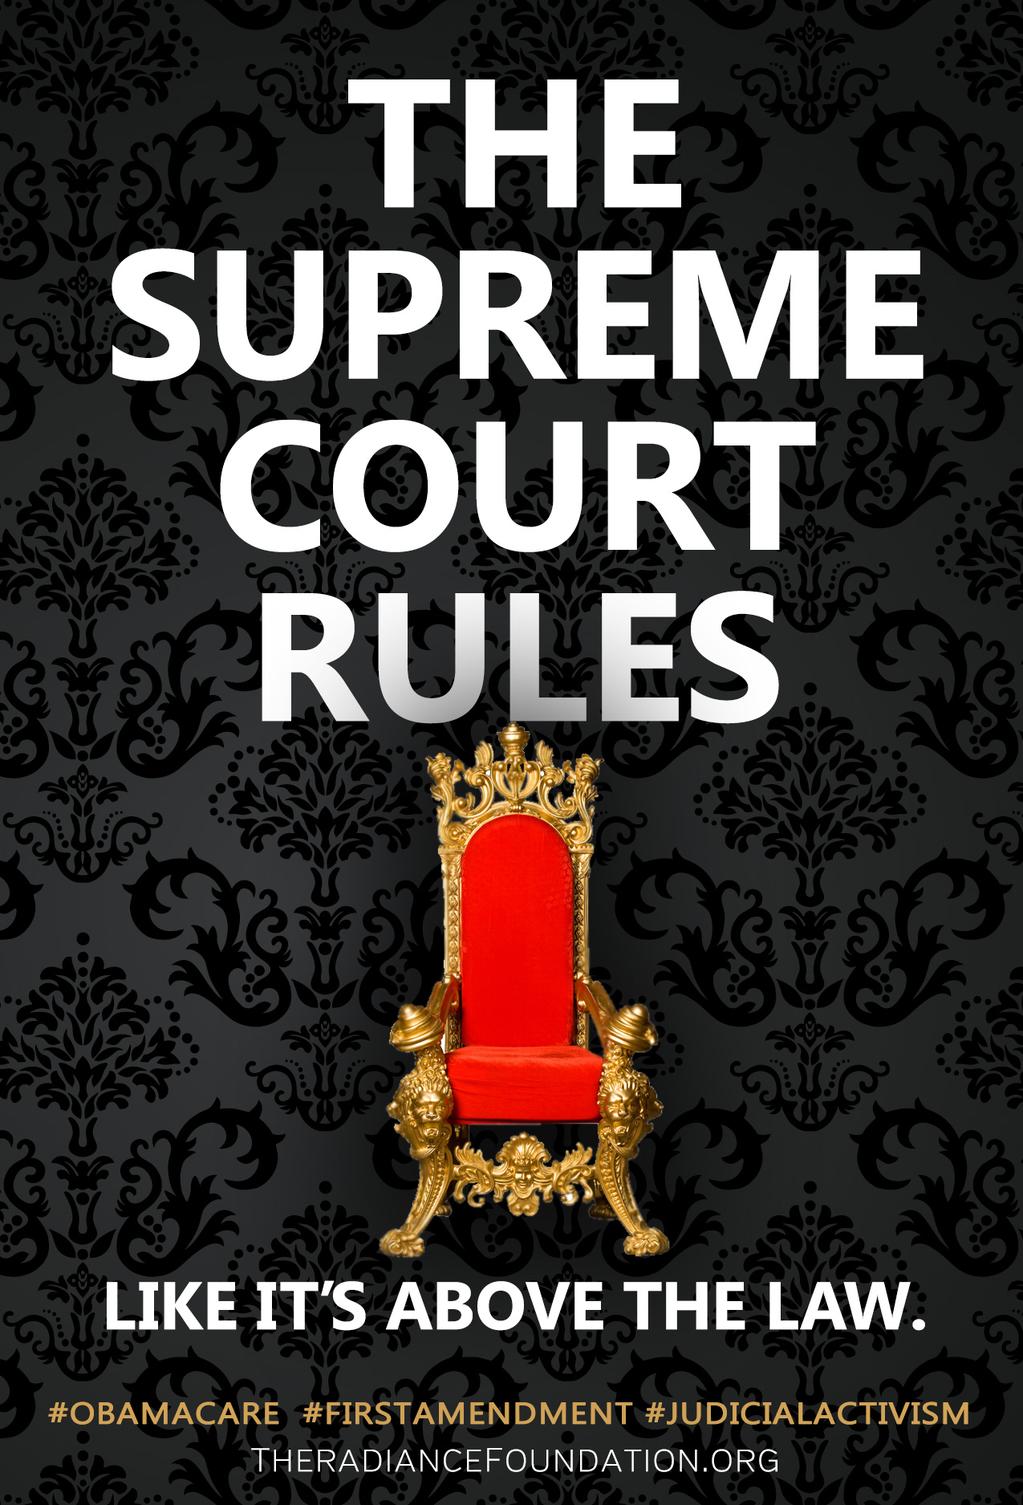 "Supreme Court Rules" by The Radiance Foundation